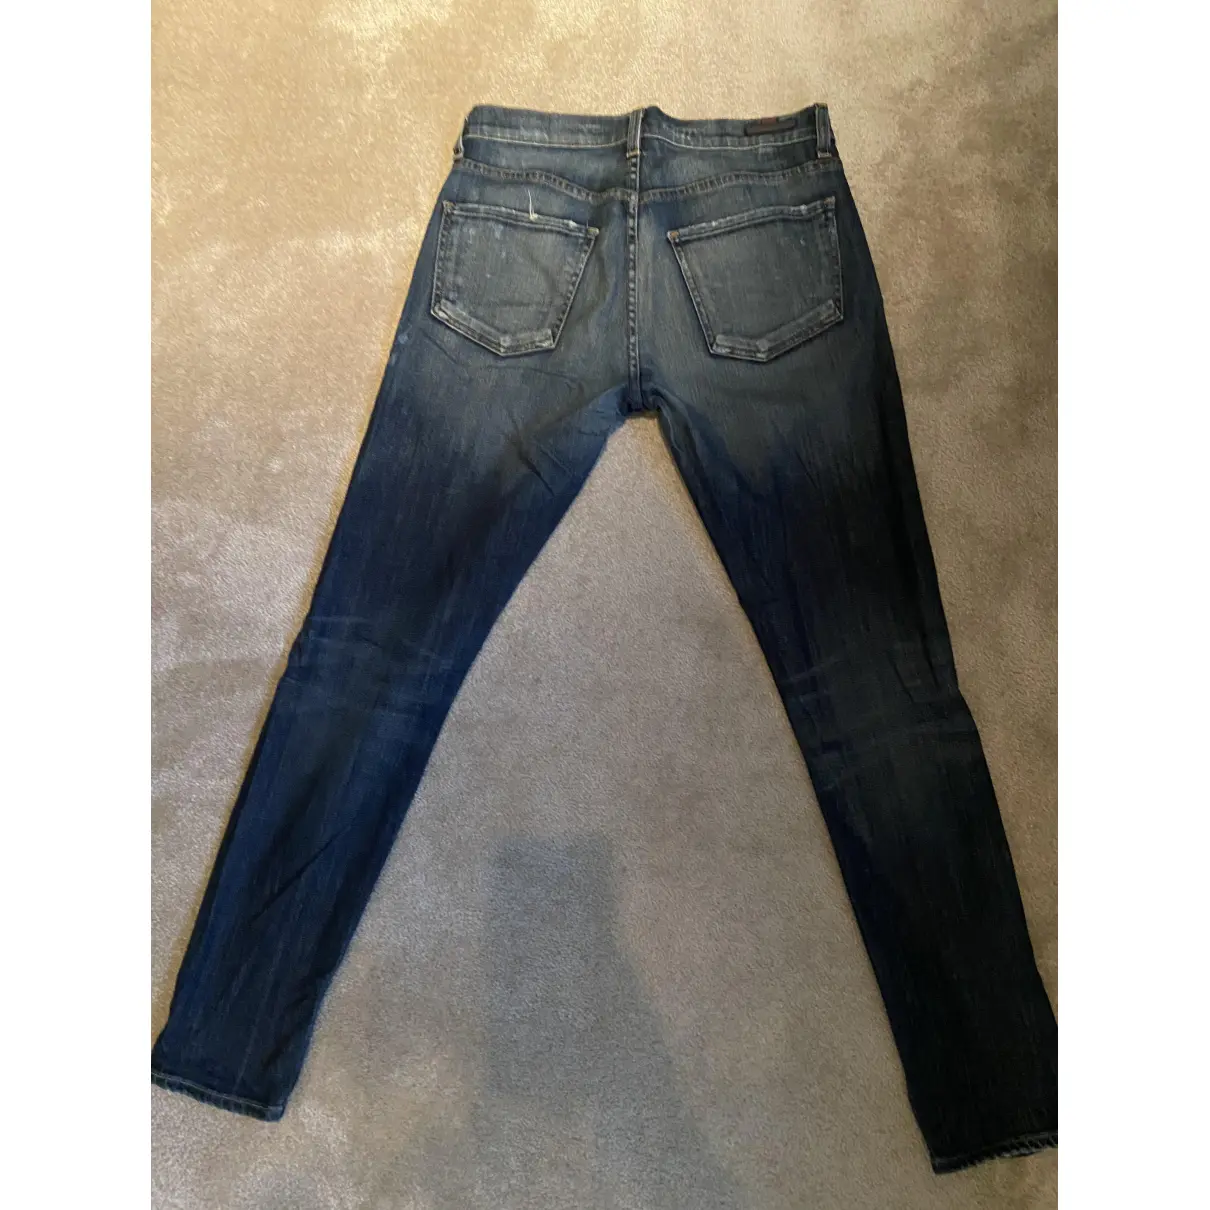 Buy Citizens Of Humanity Blue Cotton - elasthane Jeans online